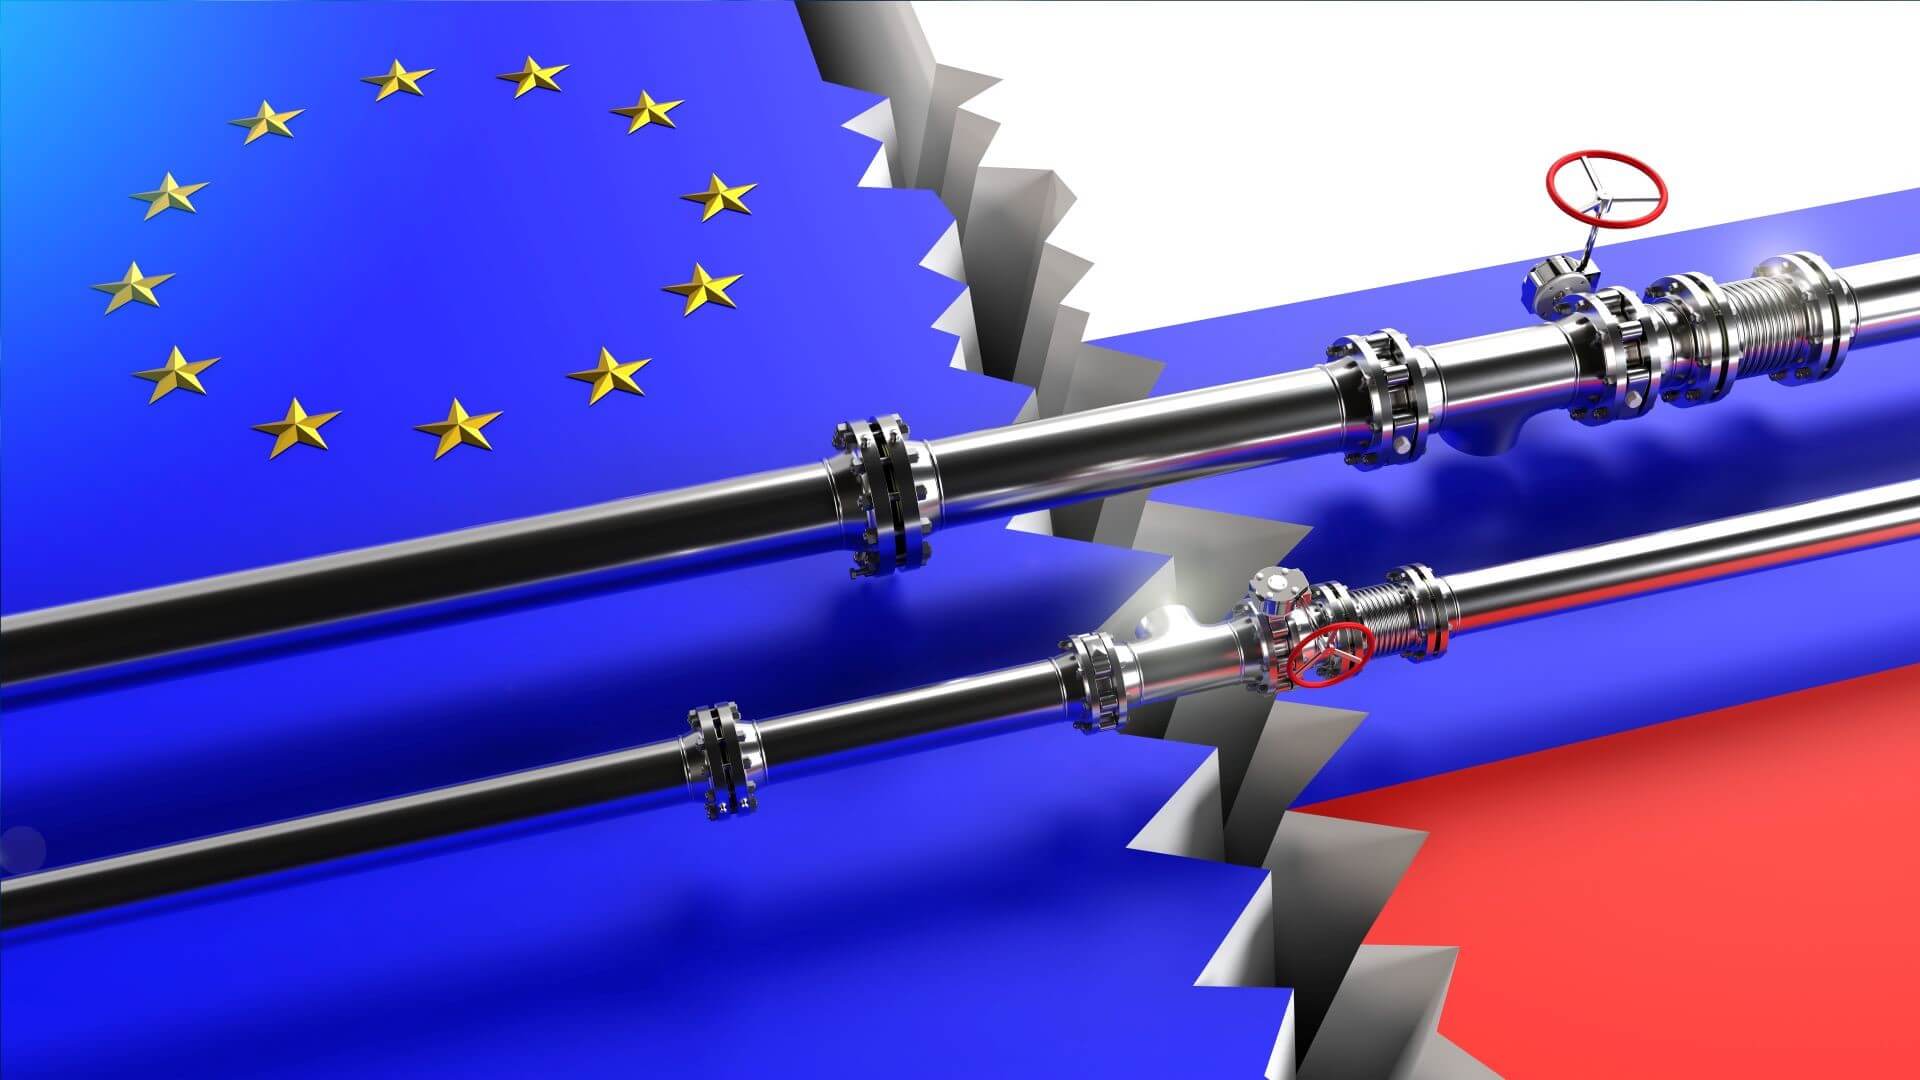 Graphic of European Union flag to left split from Russian flag to right, with pipelines and crossing between the two